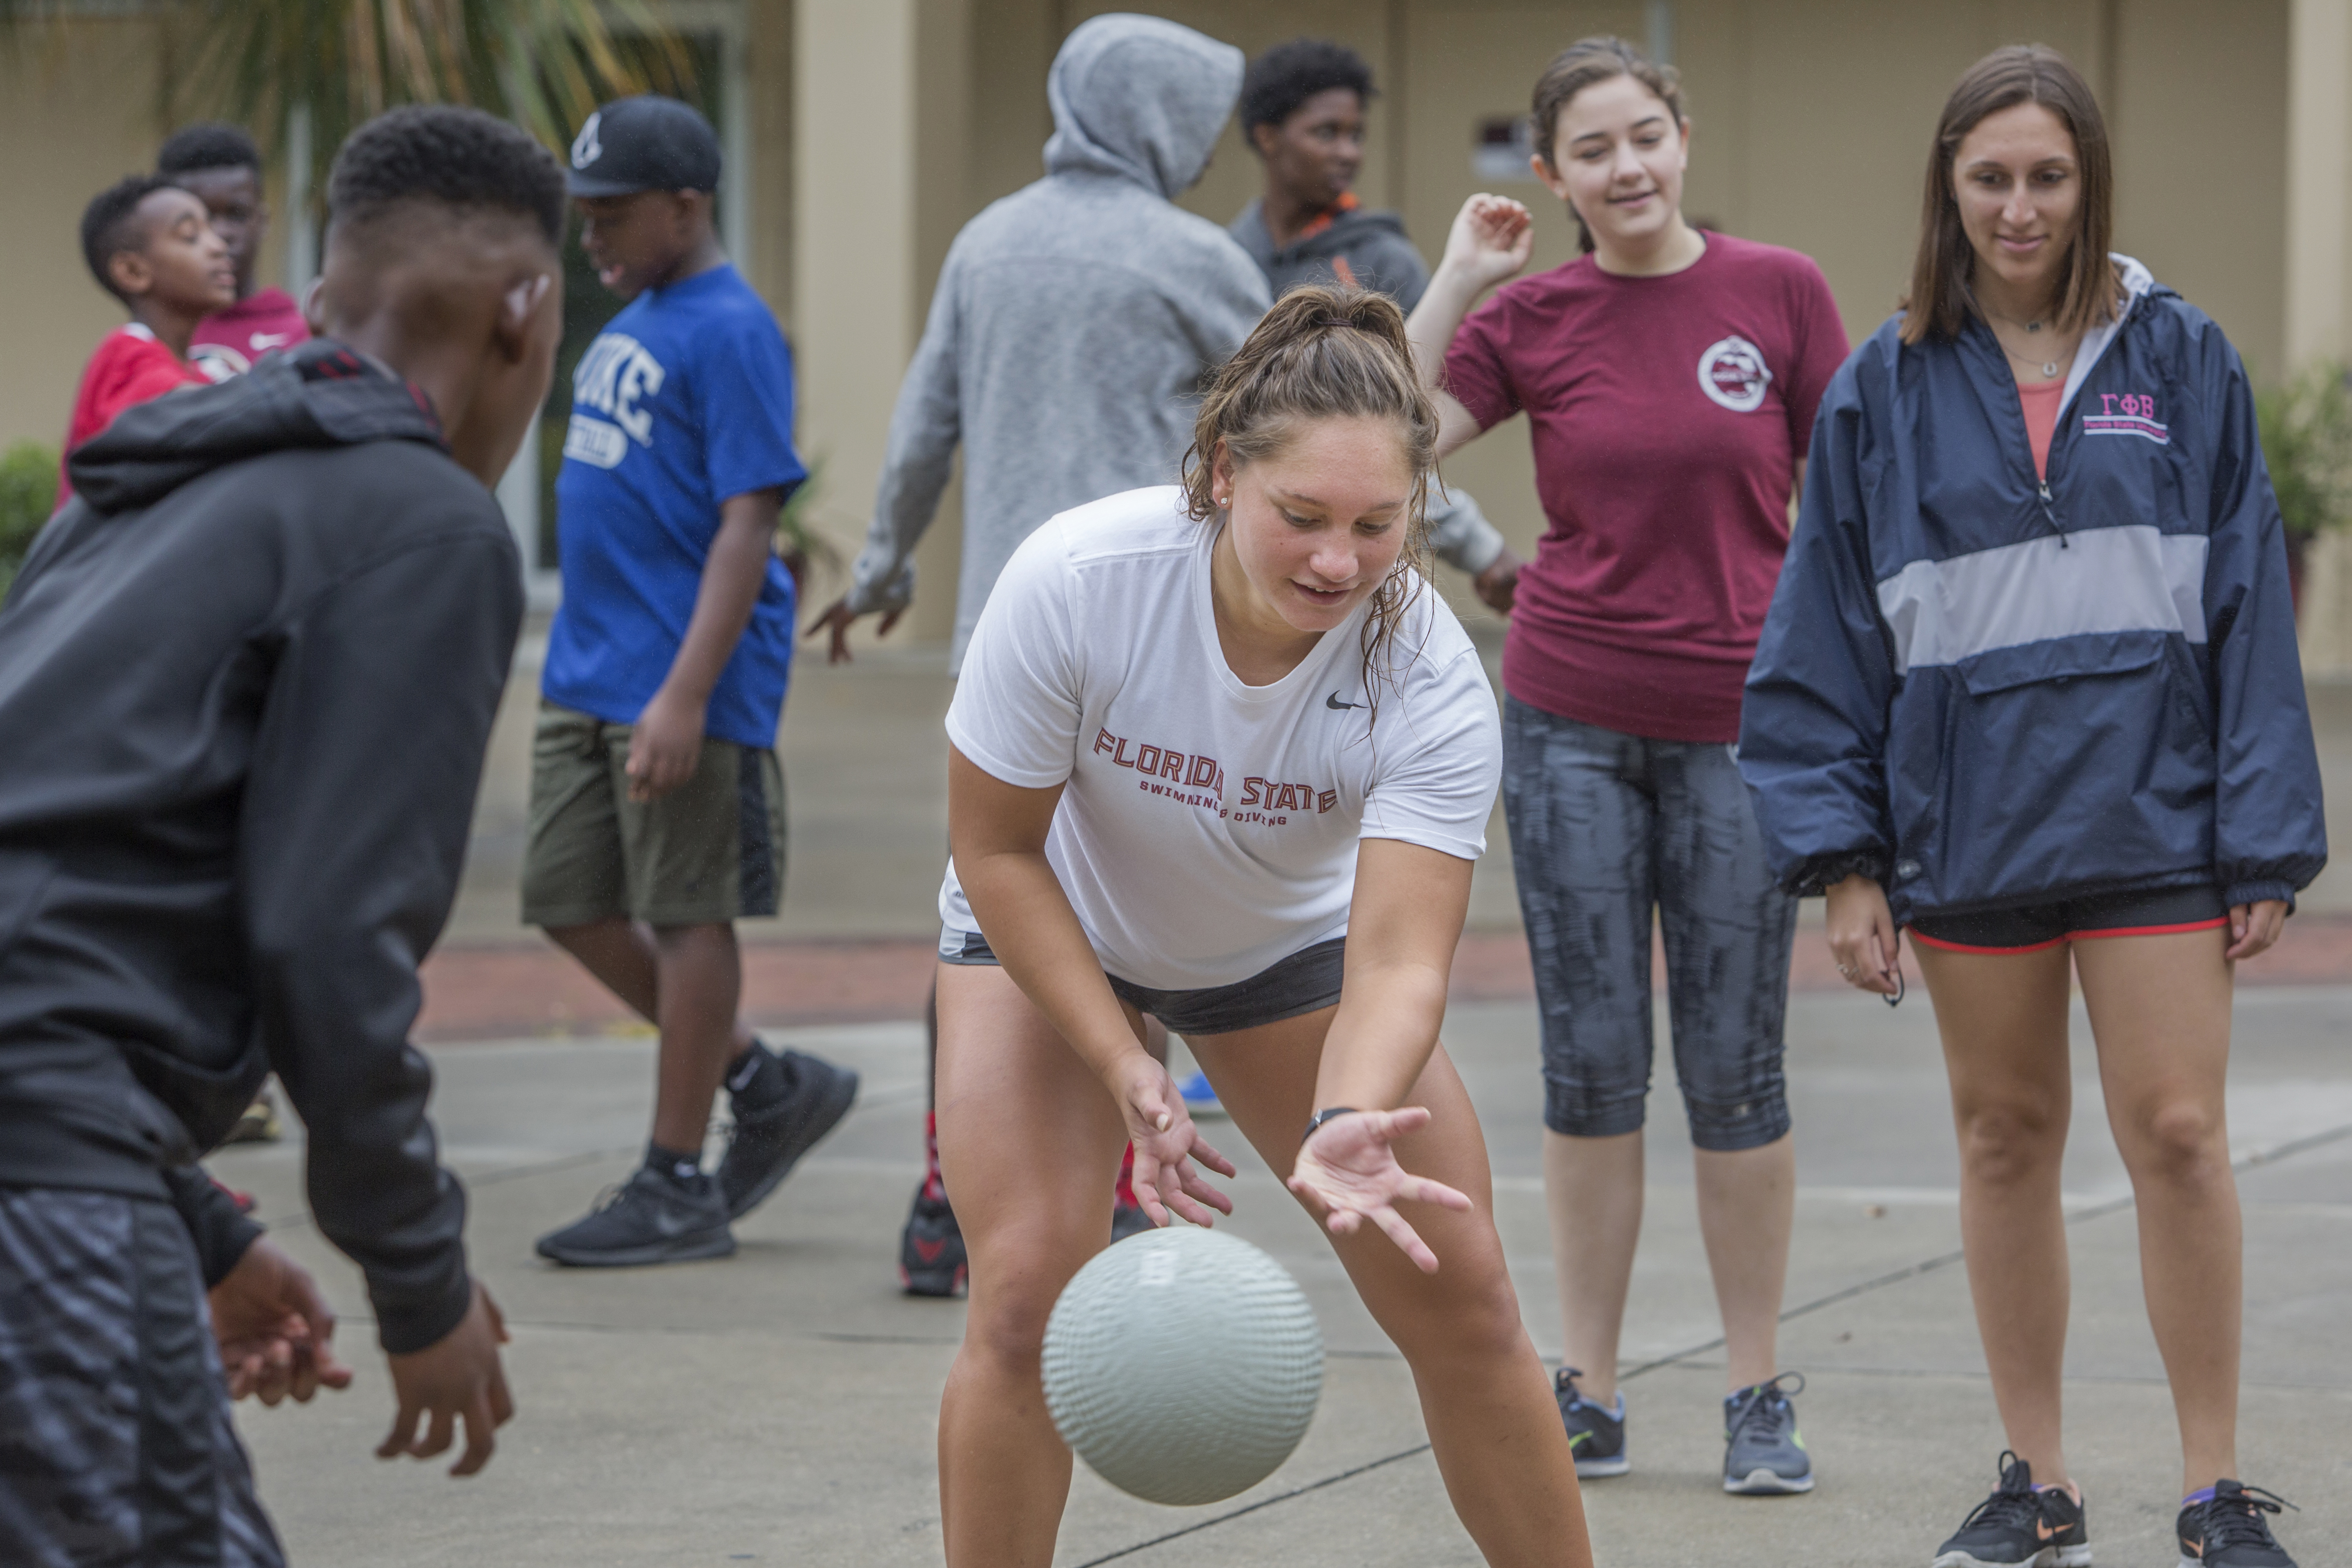 FSU Swimmer Paige Schendelaar-Kimp playing four square with campers.